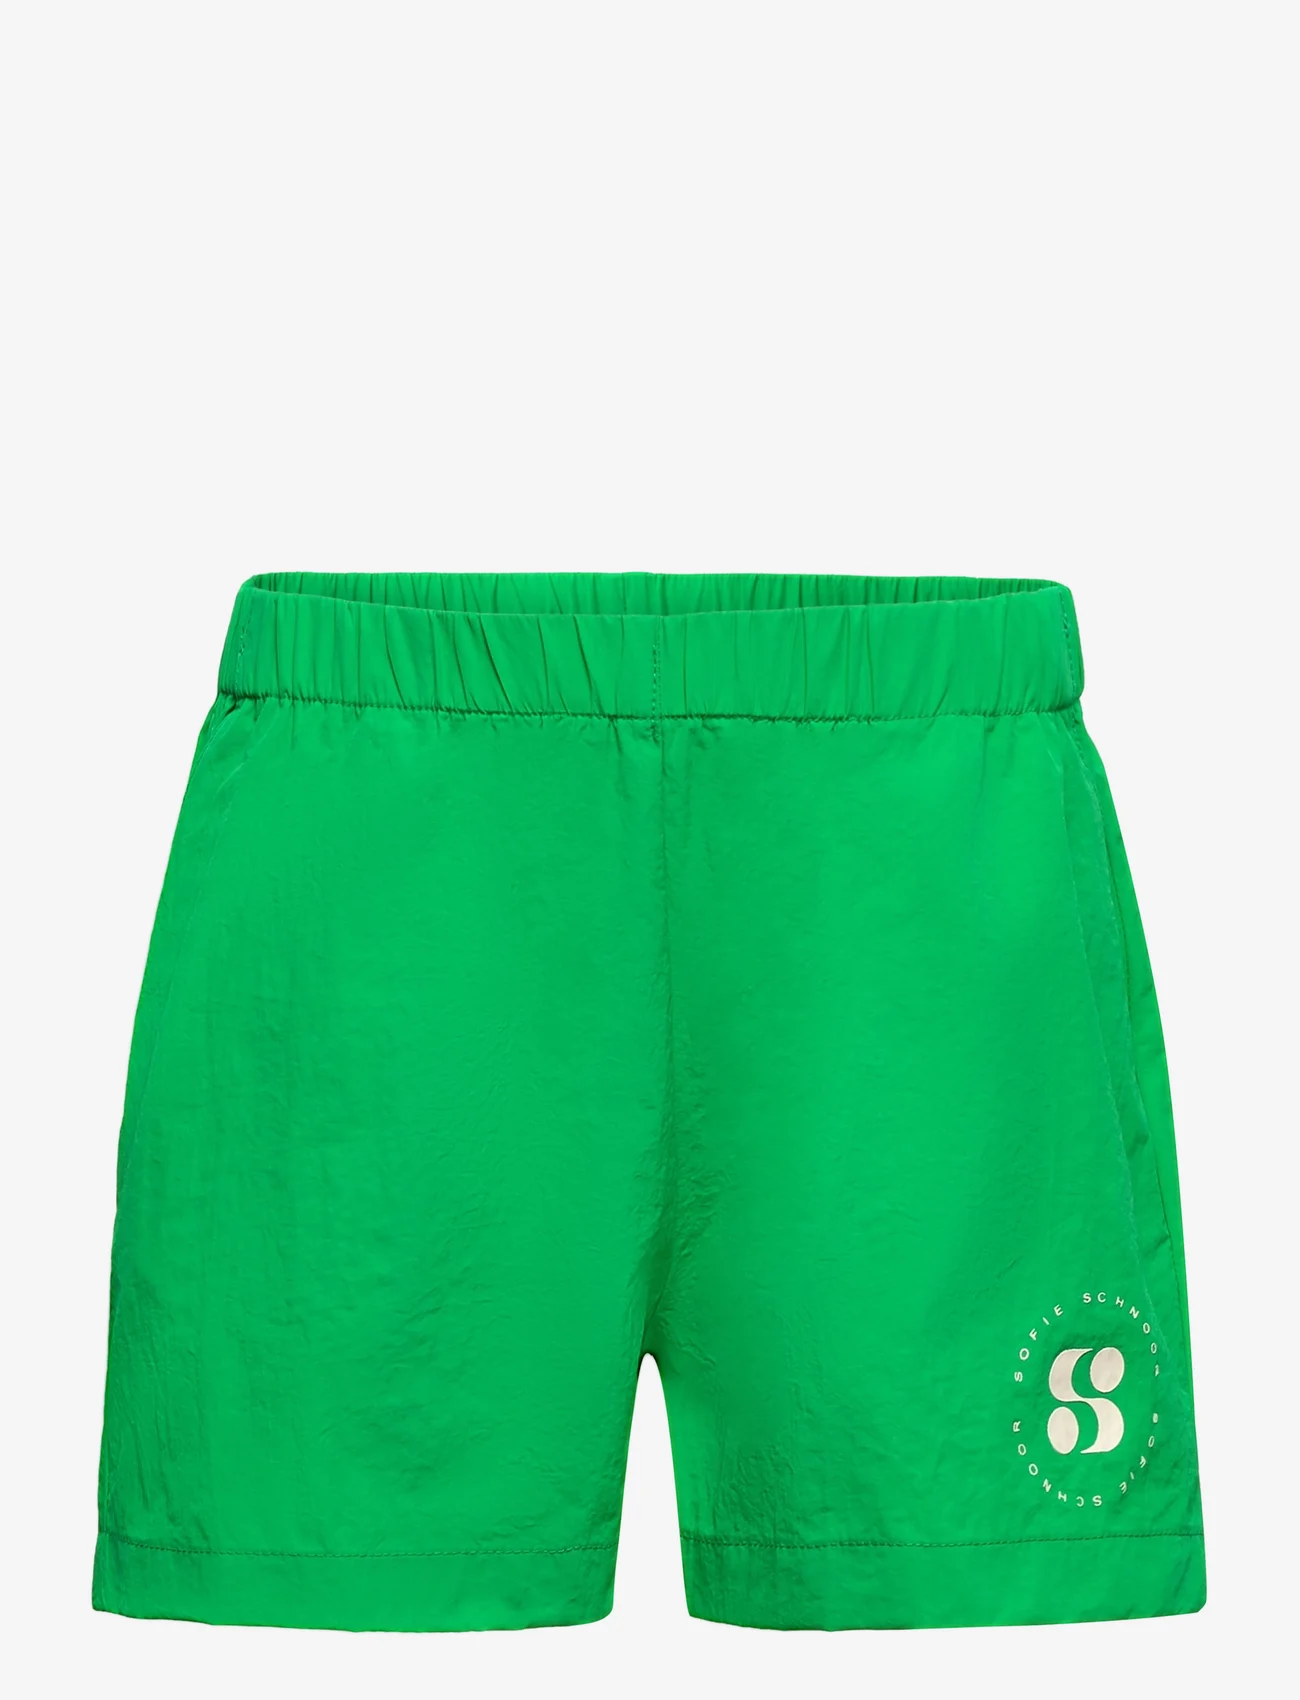 Sofie Schnoor Baby and Kids - Shorts - gode sommertilbud - bright green - 0